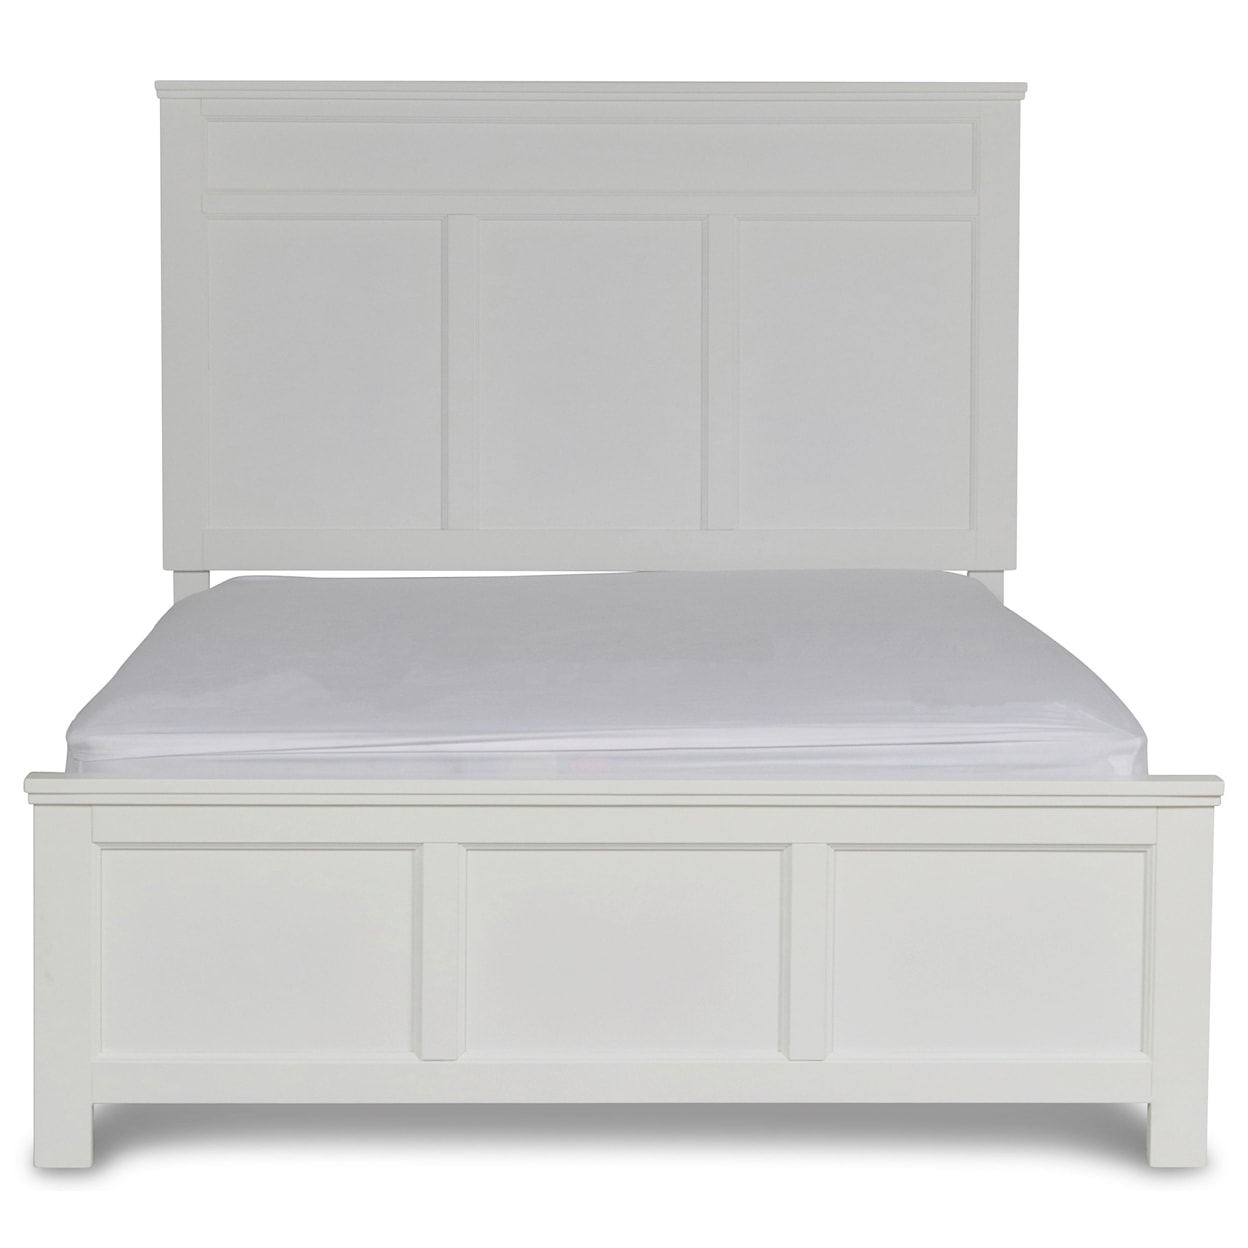 New Classic Furniture Andover California King Panel Bed